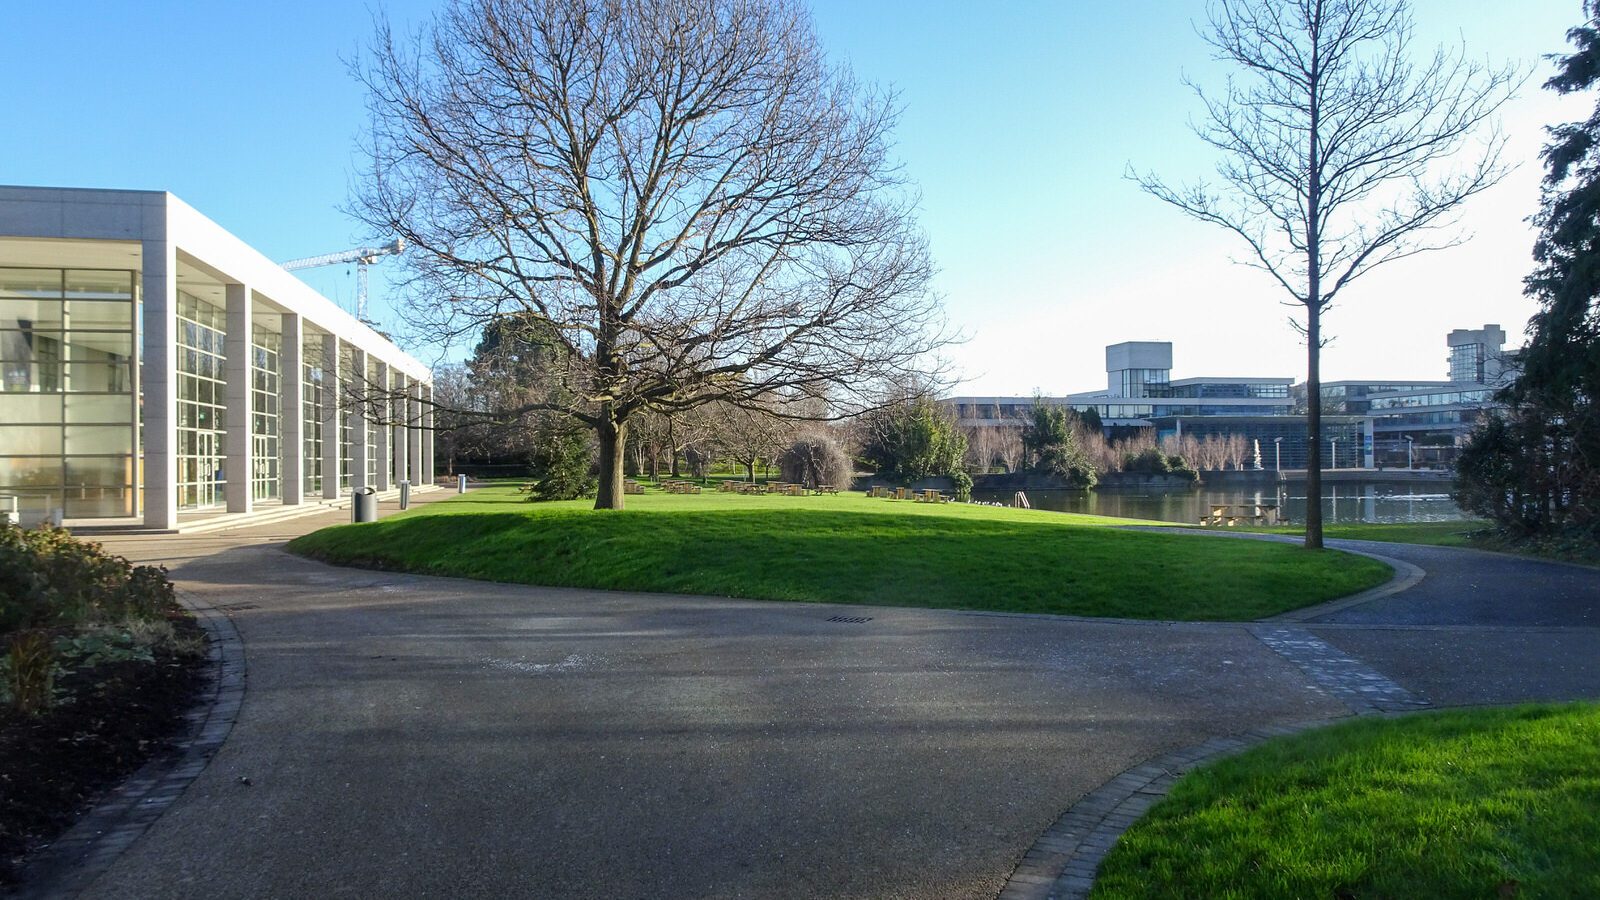 RANDOM IMAGES OF THE UNIVERSITY OF DUBLIN CAMPUS [MY MOTHER WHO IS 104 IN MAY DID NOT WANT TO COME WITH ME AS IT WAS TOO COLD]-226713-1